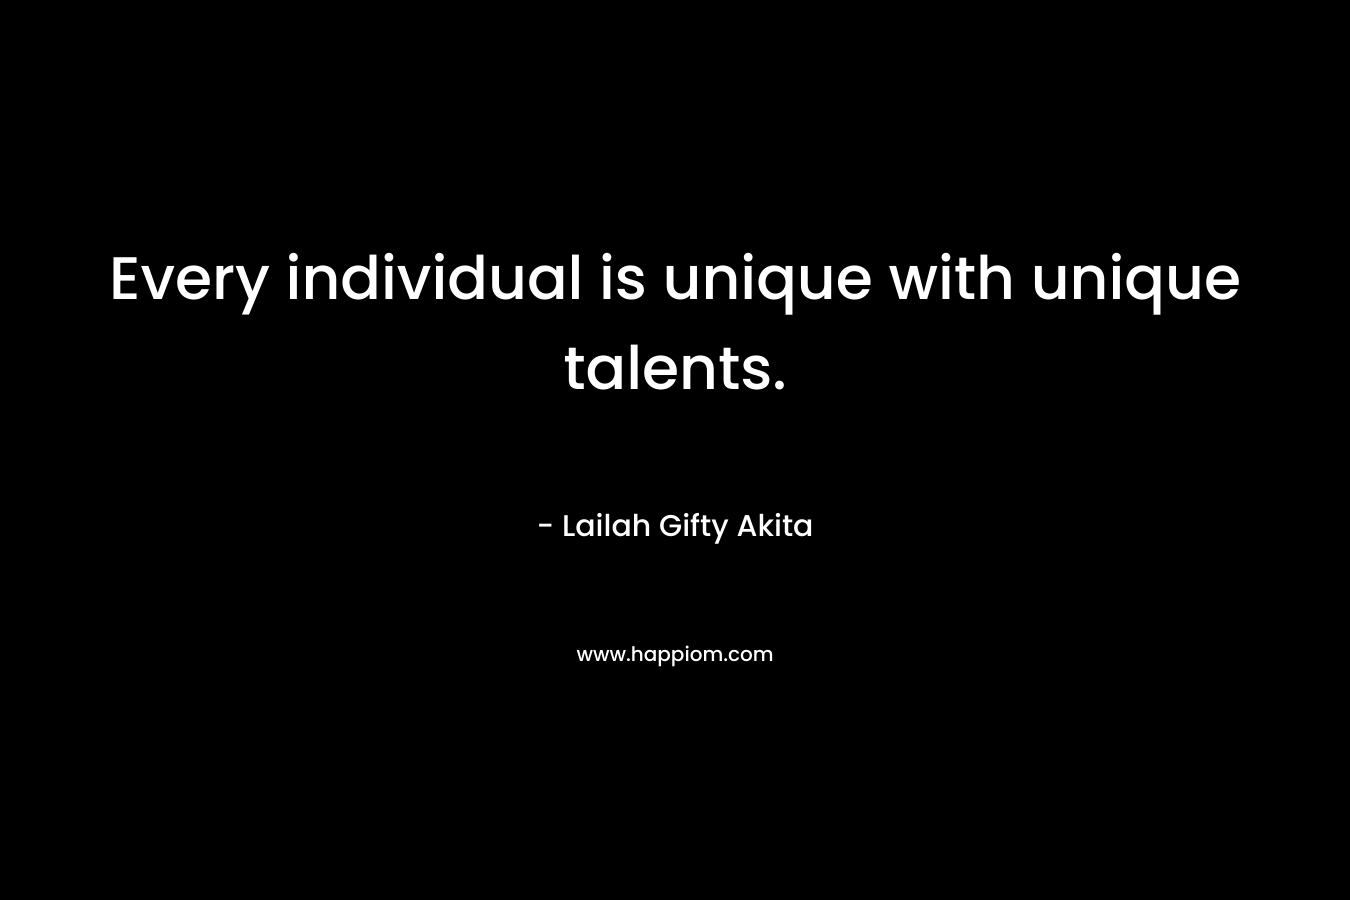 Every individual is unique with unique talents.